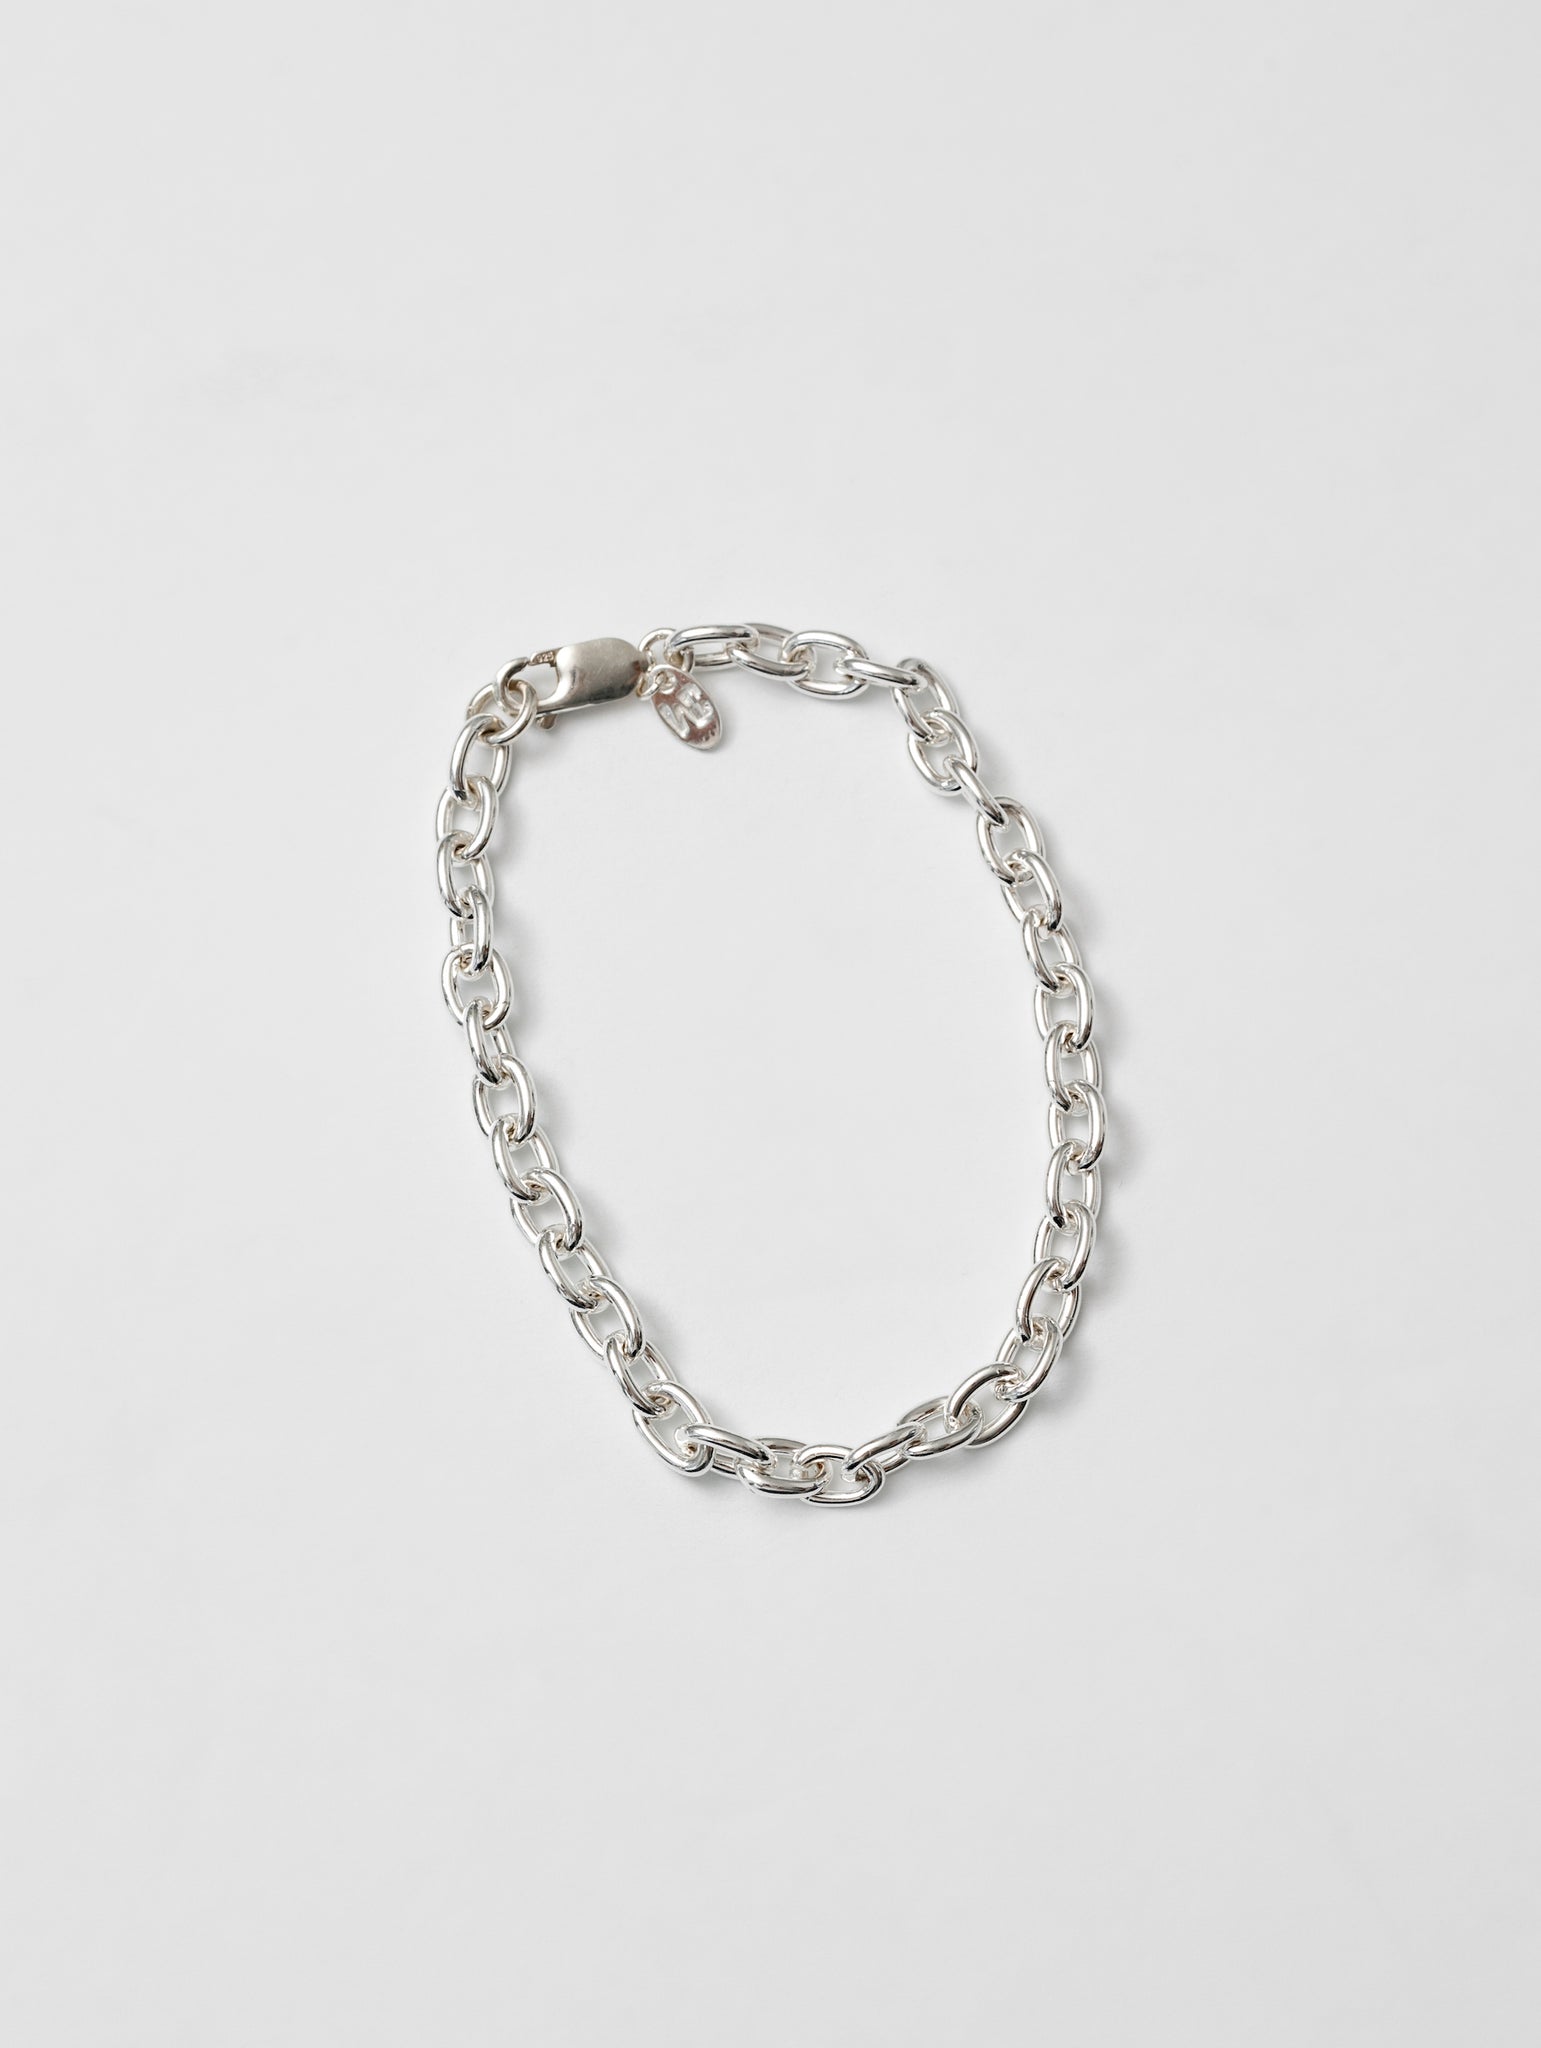 Wolf Circus Minimal Unisex Cable Chain Link Bracelet 925 Sterling Silver Jewelry